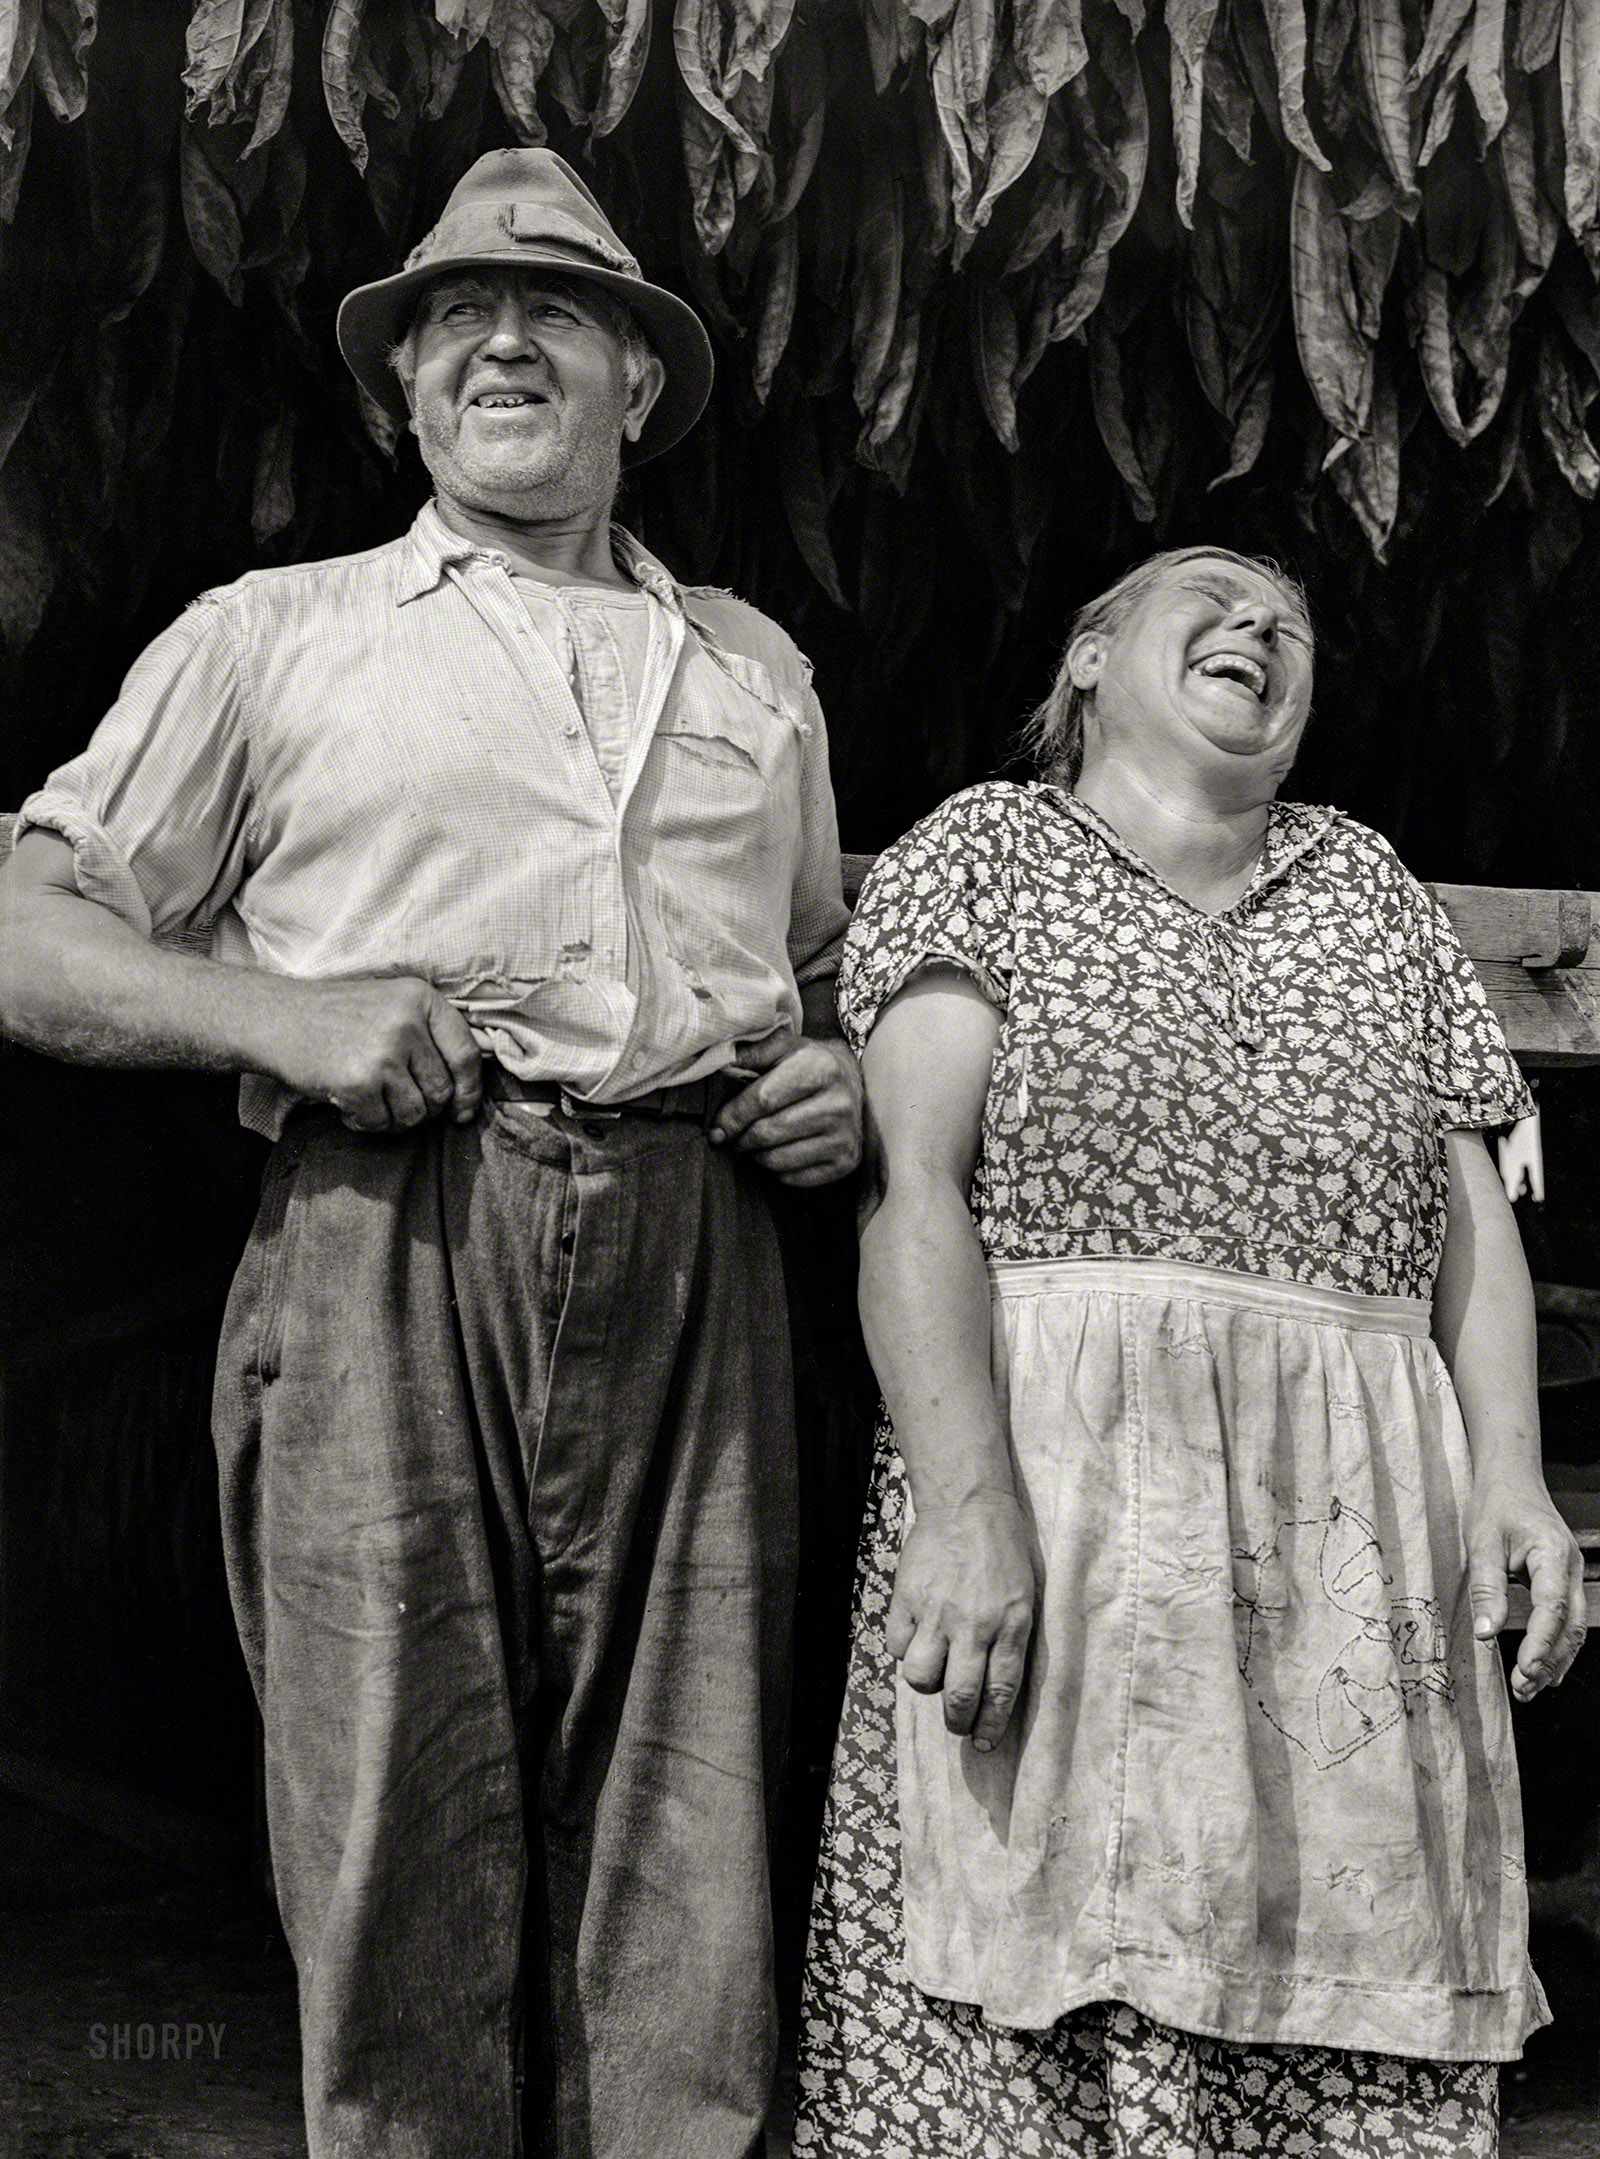 &nbsp; &nbsp; &nbsp; &nbsp; Photographer Jack Delano explains that he made the couple laugh by telling Mr. Lyman his pants were falling down. "The thought of such a catastrophe," Delano writes, "apparently made them break up."
September 1940. "Mr. and Mrs. Andrew Lyman, Polish tobacco farmers near Windsor Locks, Connecticut." Medium format acetate negative by Jack Delano for the Farm Security Administration. View full size.